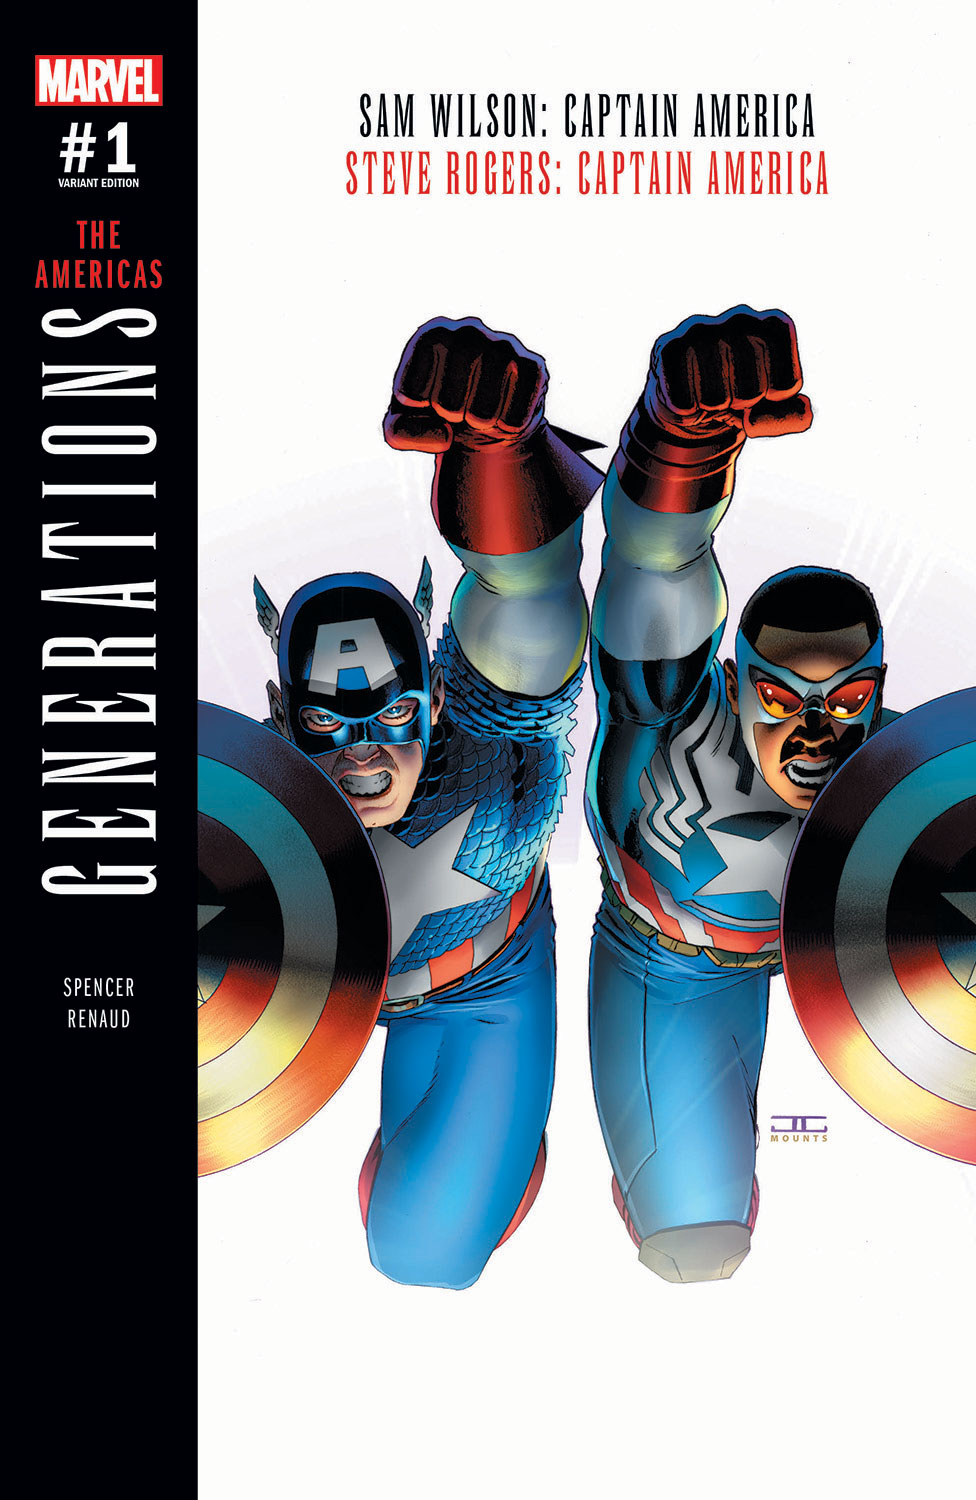 Marvel unveils creative teams and covers for Generations team-up event